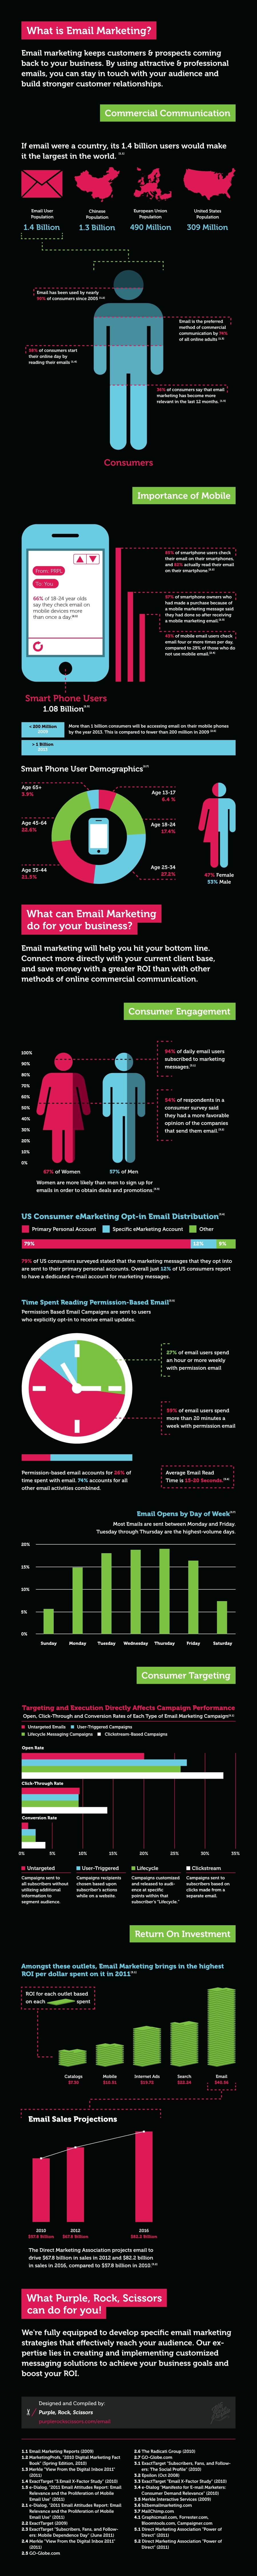 Email Marketing Practices Explained [Infographic]